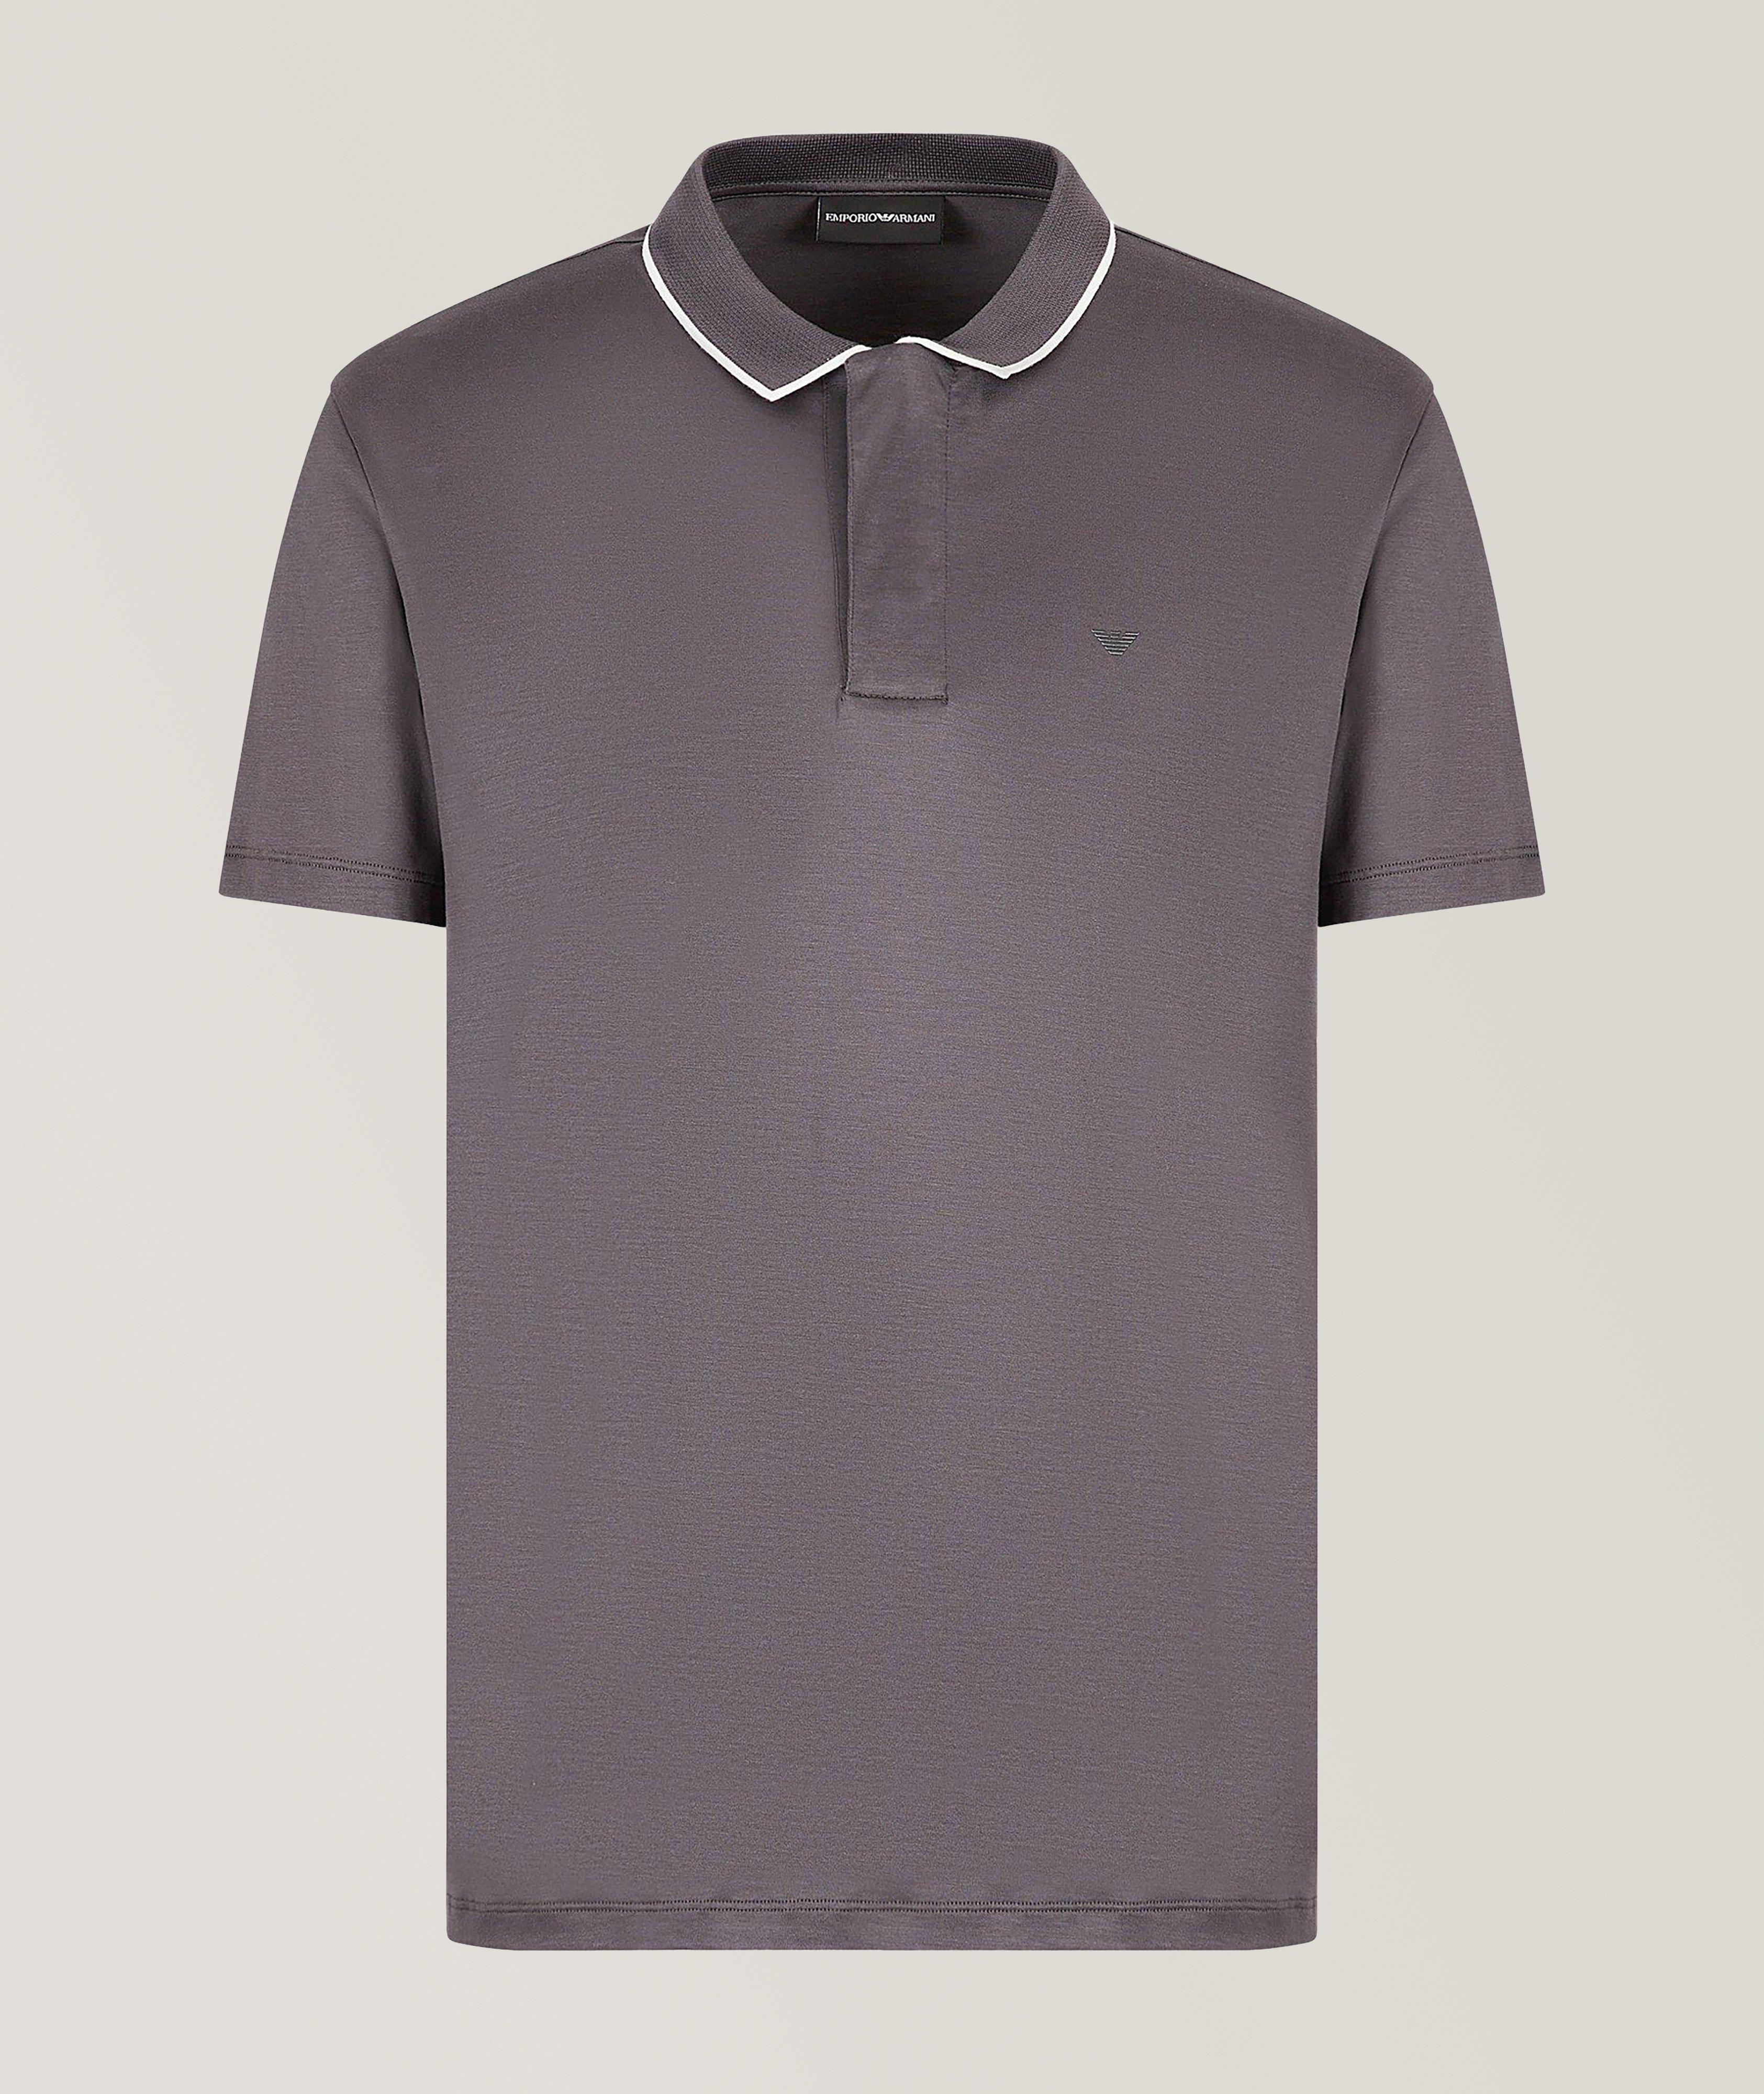 Short-Sleeve Contrast Tipped Polo image 0